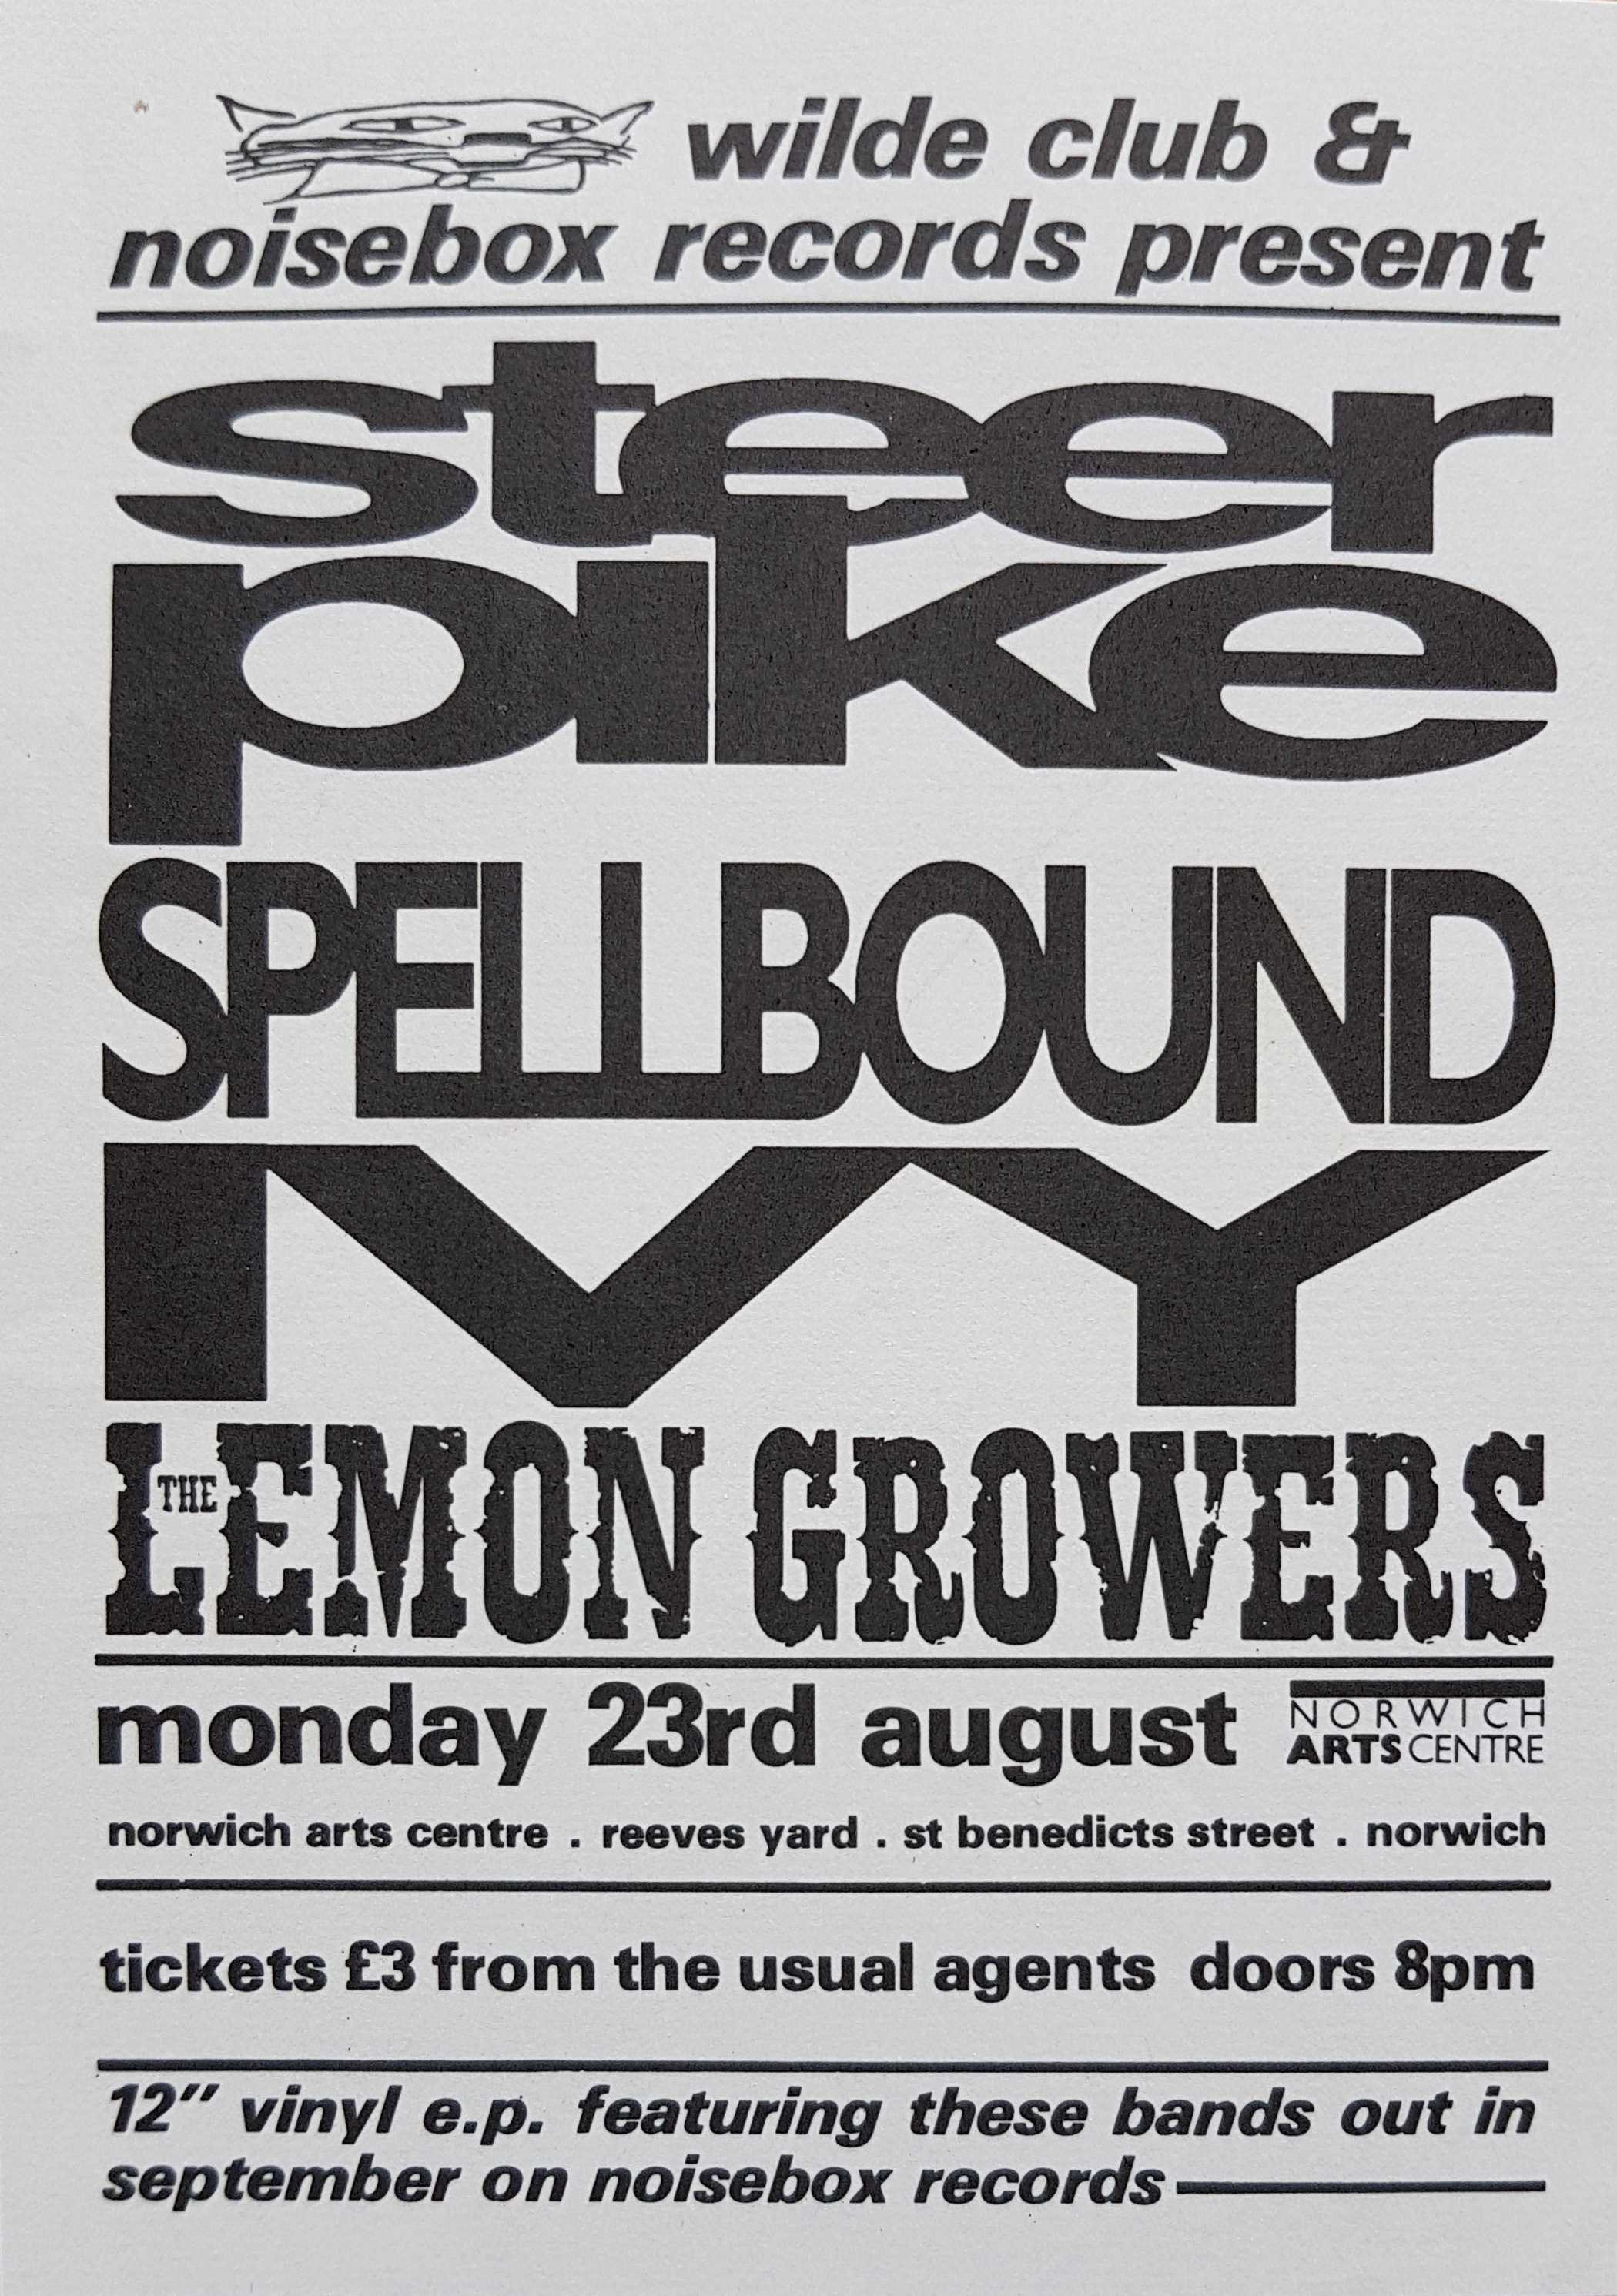 Picture of Poster-TLG-NACS Norwich Arts Centre - Small (With Steer Pike / Spellbound / Ivy) by artist The Lemon Growers 